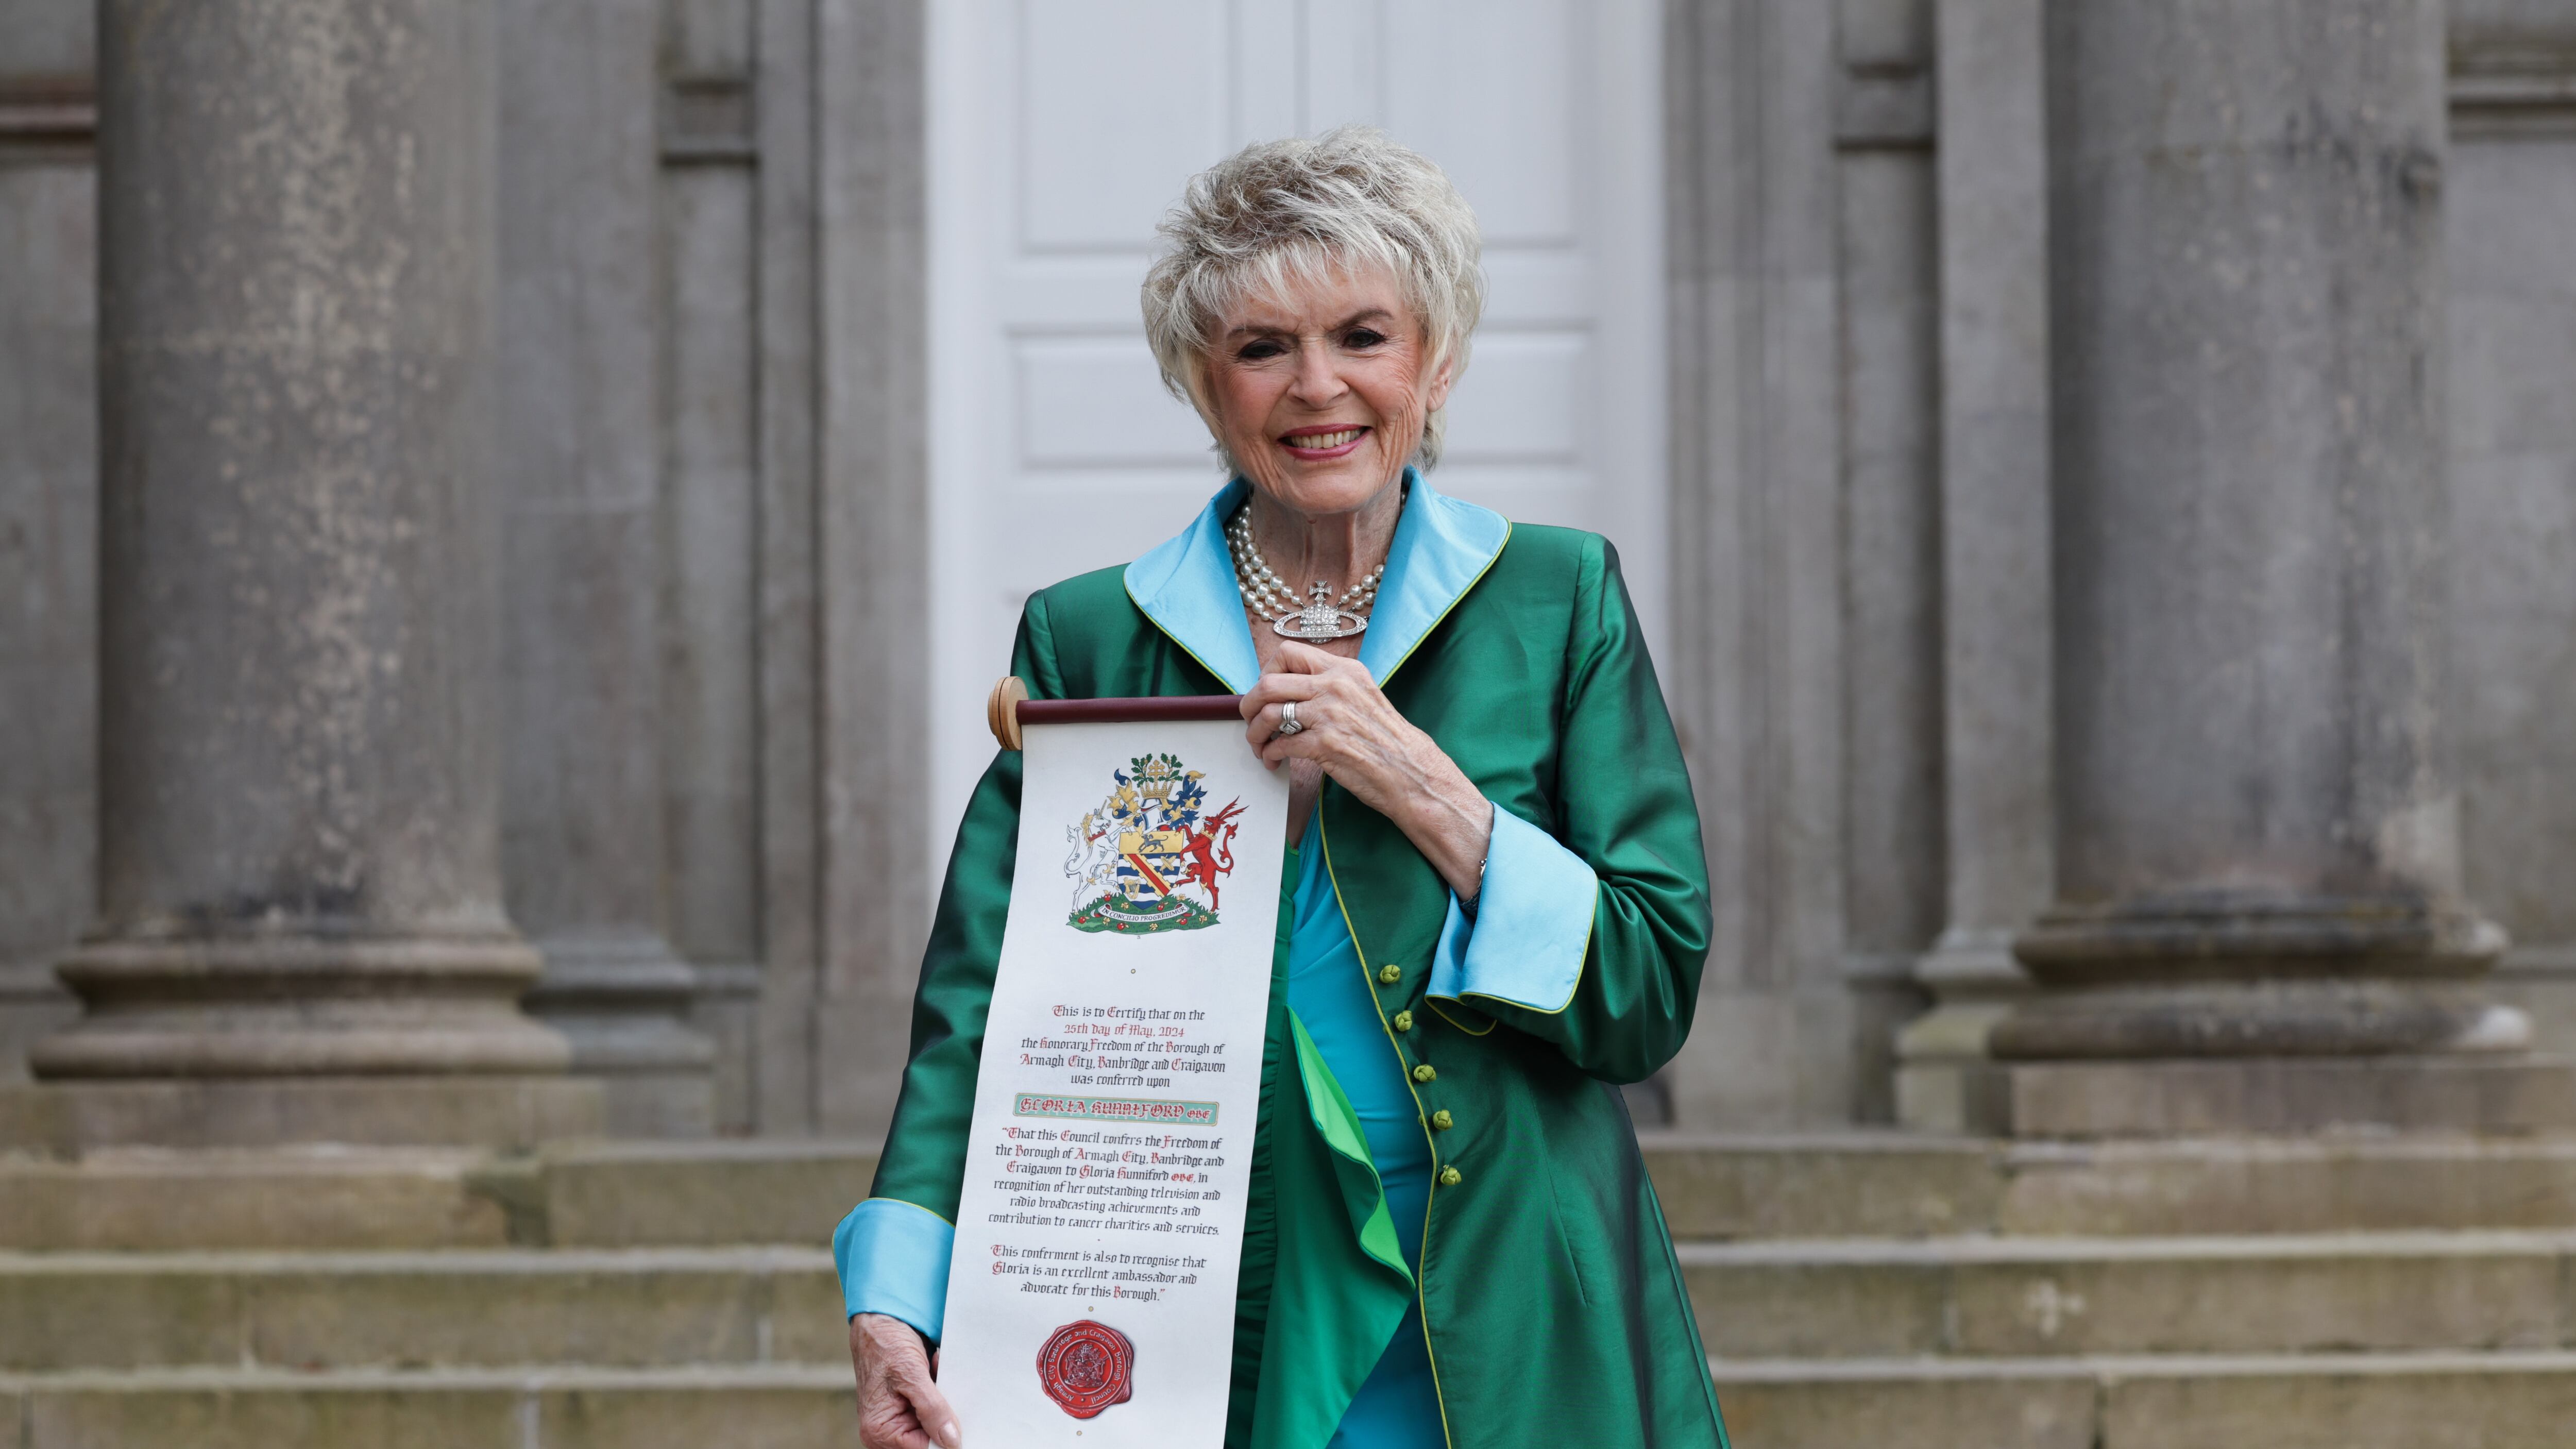 Gloria Hunniford became the first woman to be granted the freedom of the Armagh City, Banbridge and Craigavon Borough